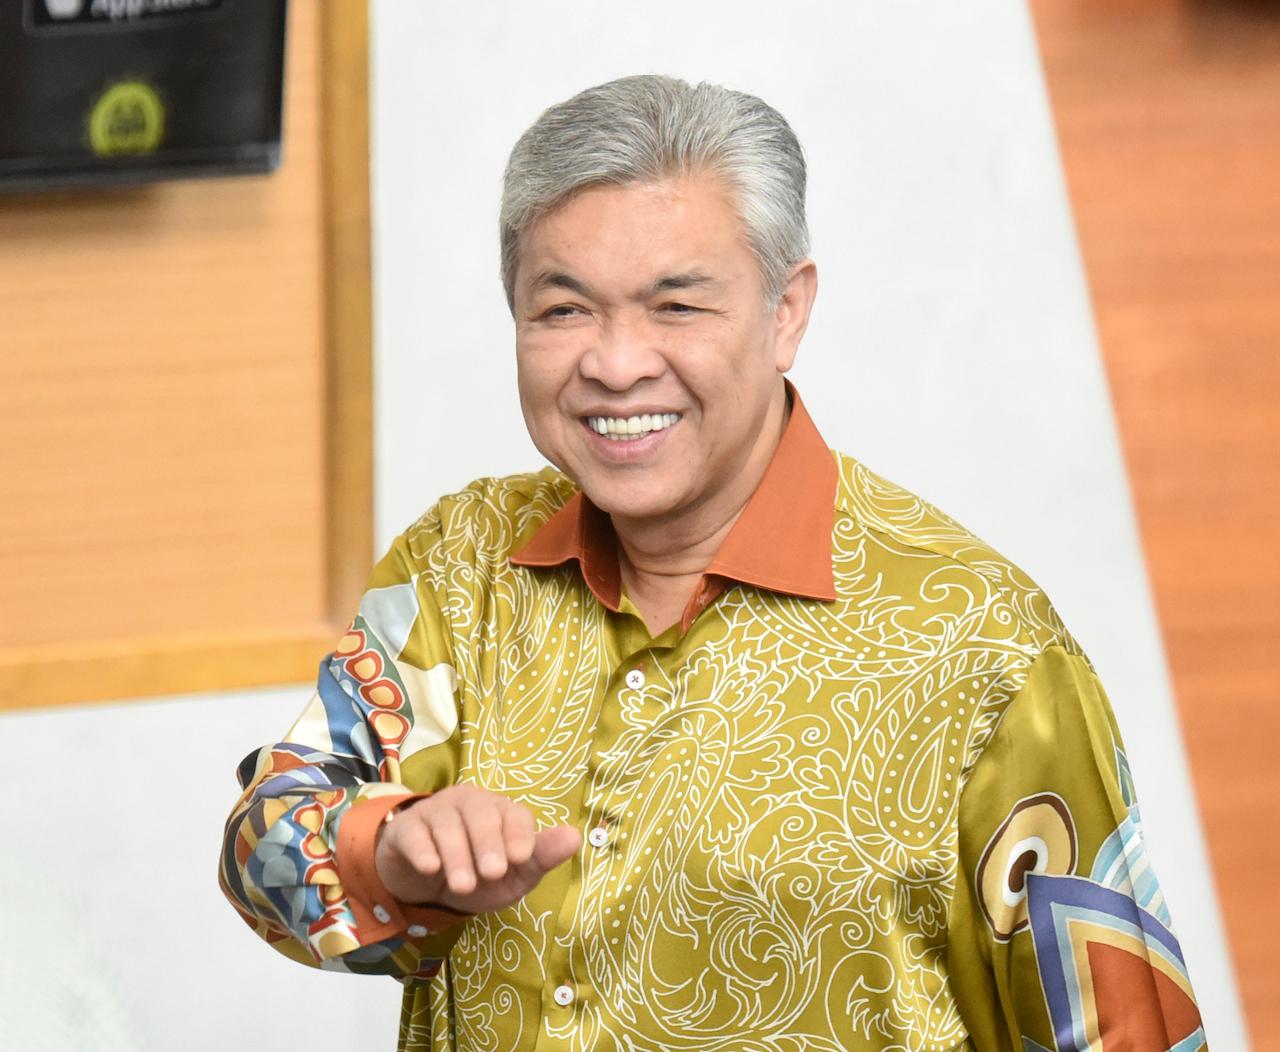 Umno president Ahmad Zahid Hamidi at the Malaysian Anti-Corruption Commission in Putrajaya for questioning in 2018. Questions have been raised over the political prospects of Zahid, who was later slapped with 47 criminal charges. Photo: AP